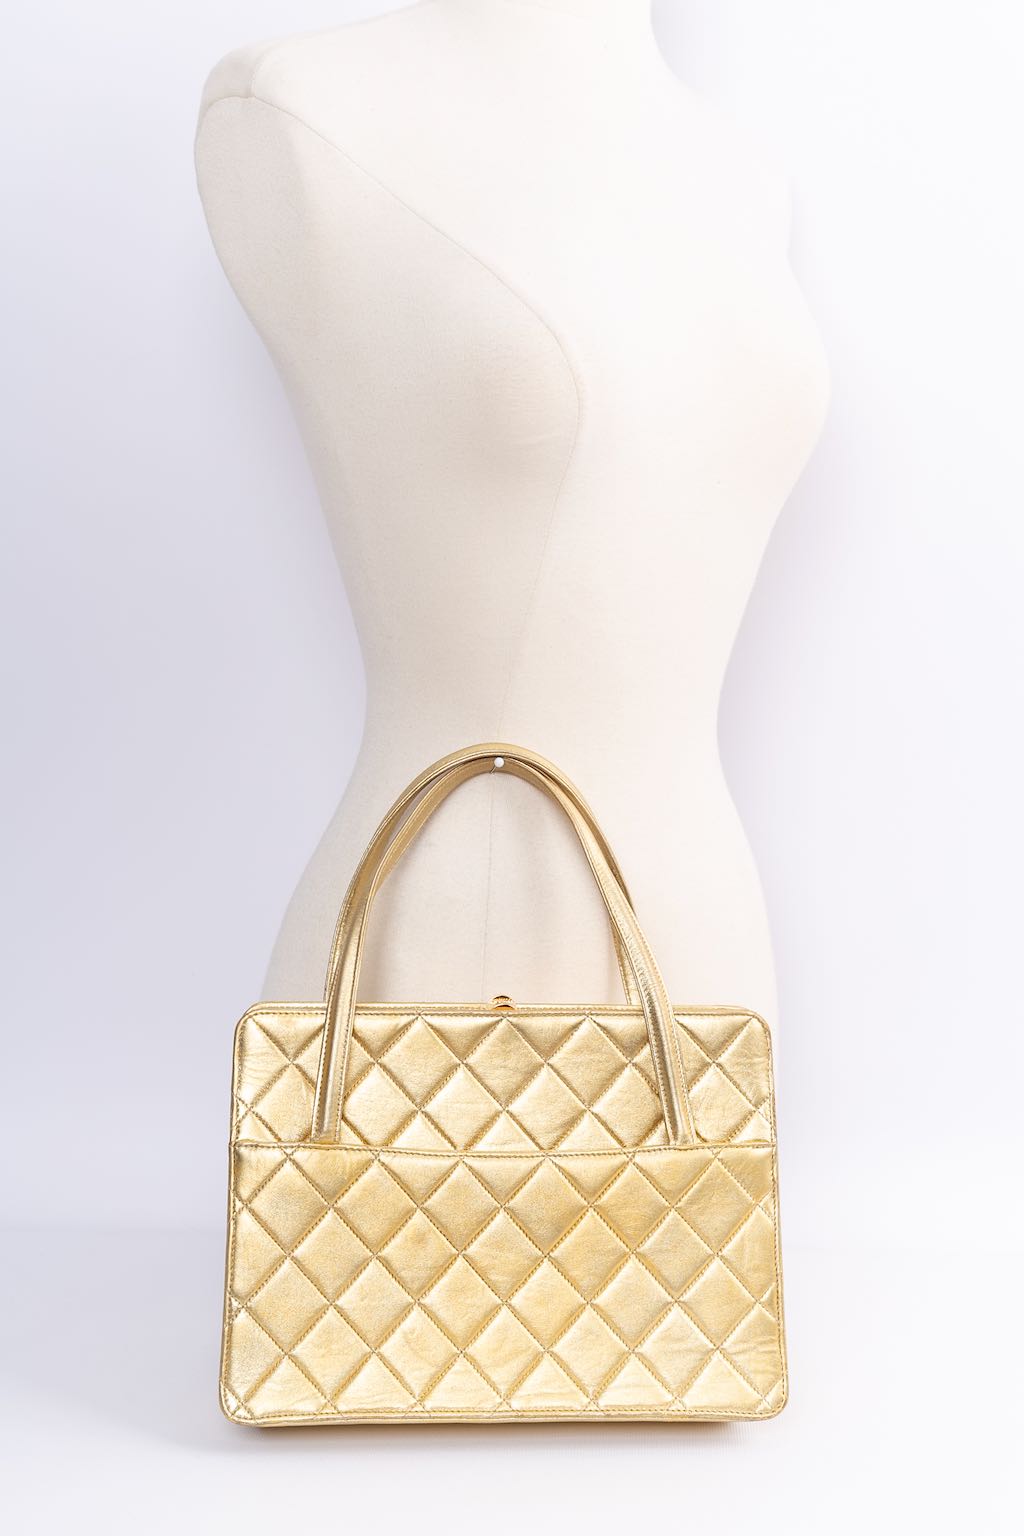 Chanel evening bag in gold leather